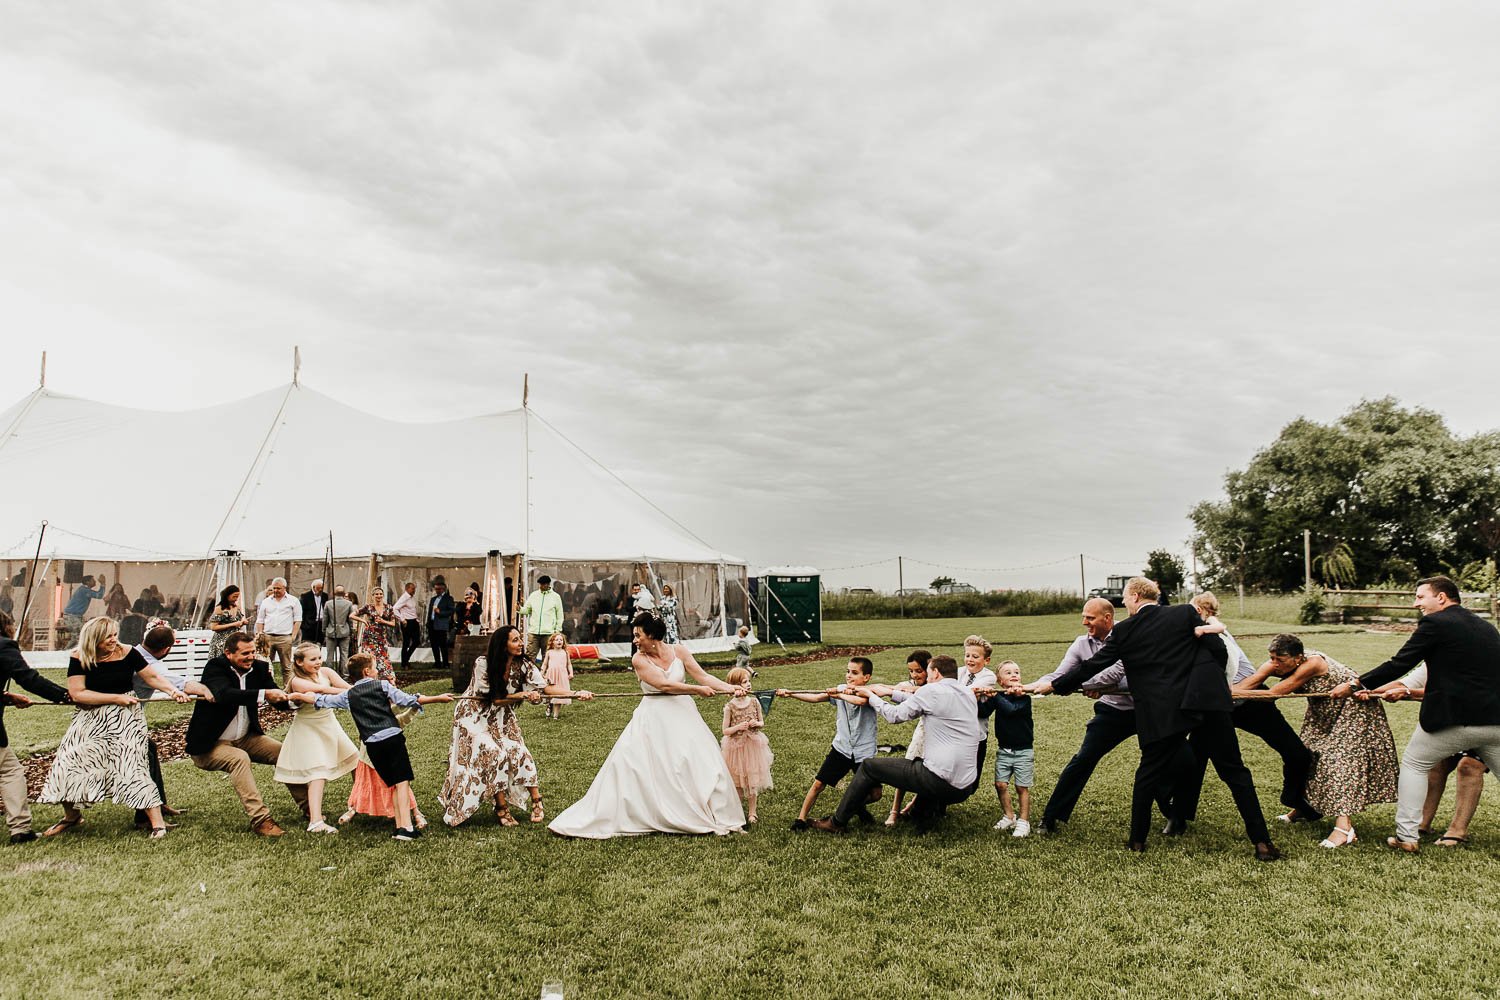 Guests battling it out in a game of tug of war at a rustic farm wedding venue